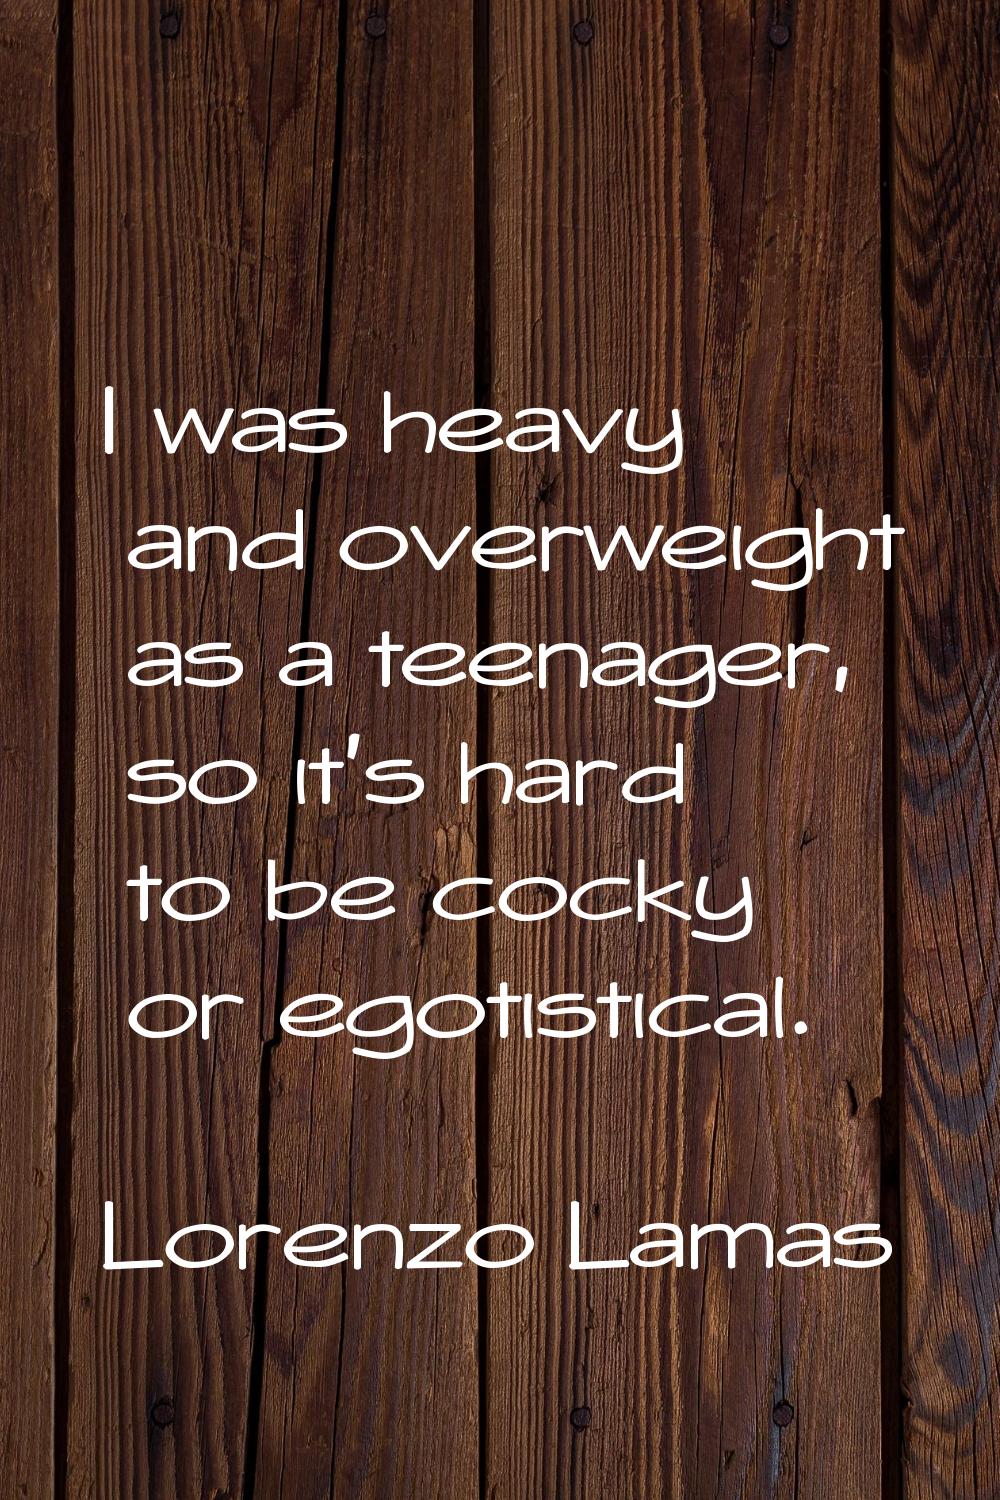 I was heavy and overweight as a teenager, so it's hard to be cocky or egotistical.